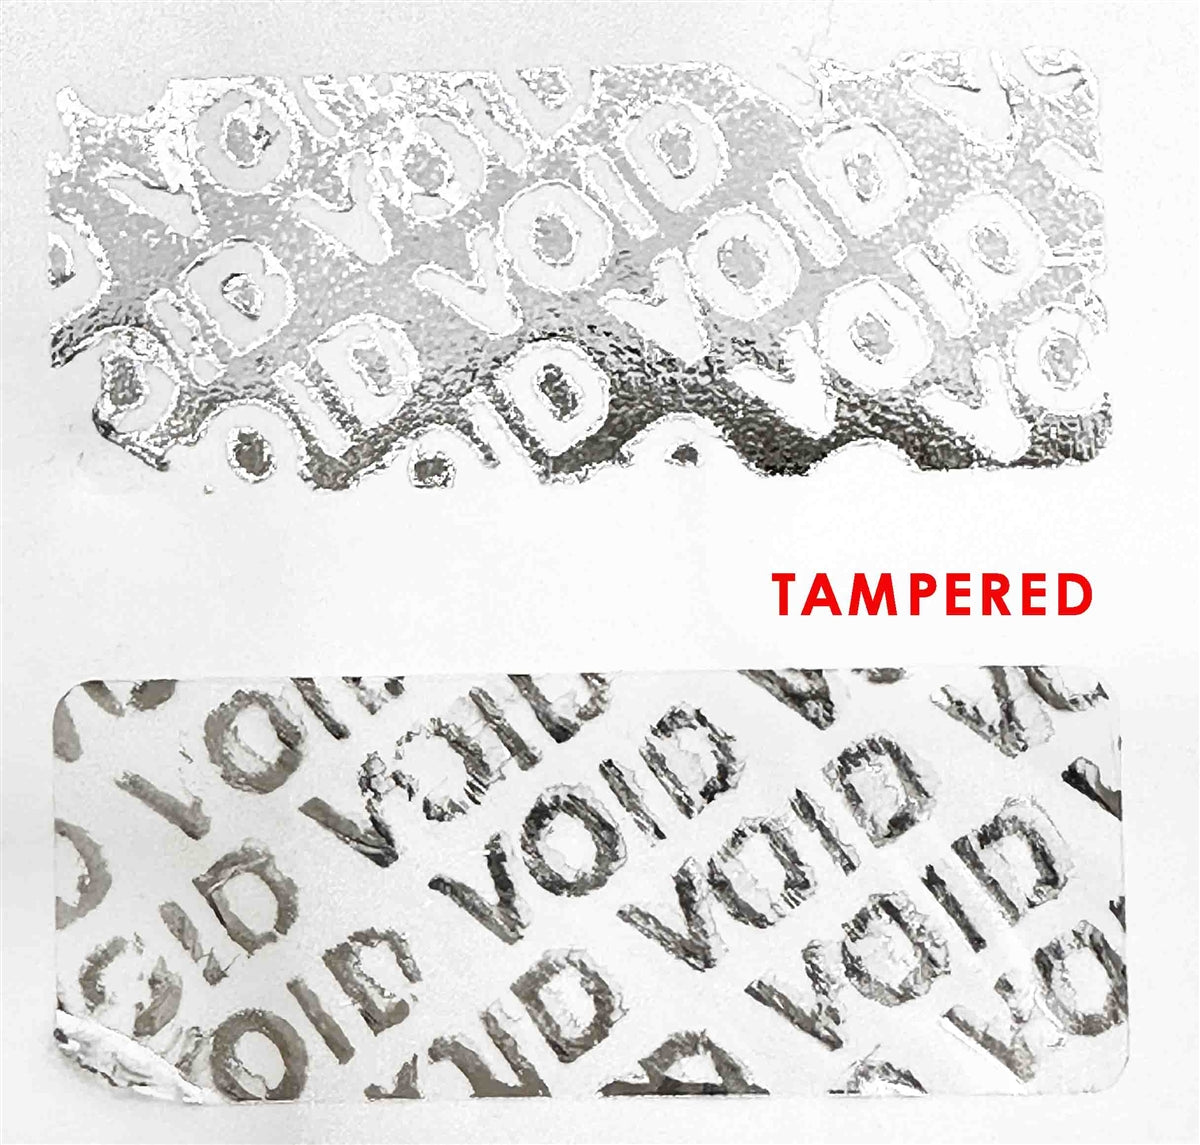 2,000 Metallic Tamper Evident Security Labels Silver Chrome TamperVoidPro Seal Sticker, Rectangle 1.5" x 0.6" (38mm x 15mm). Custom Printed. >Click on item details to customize.